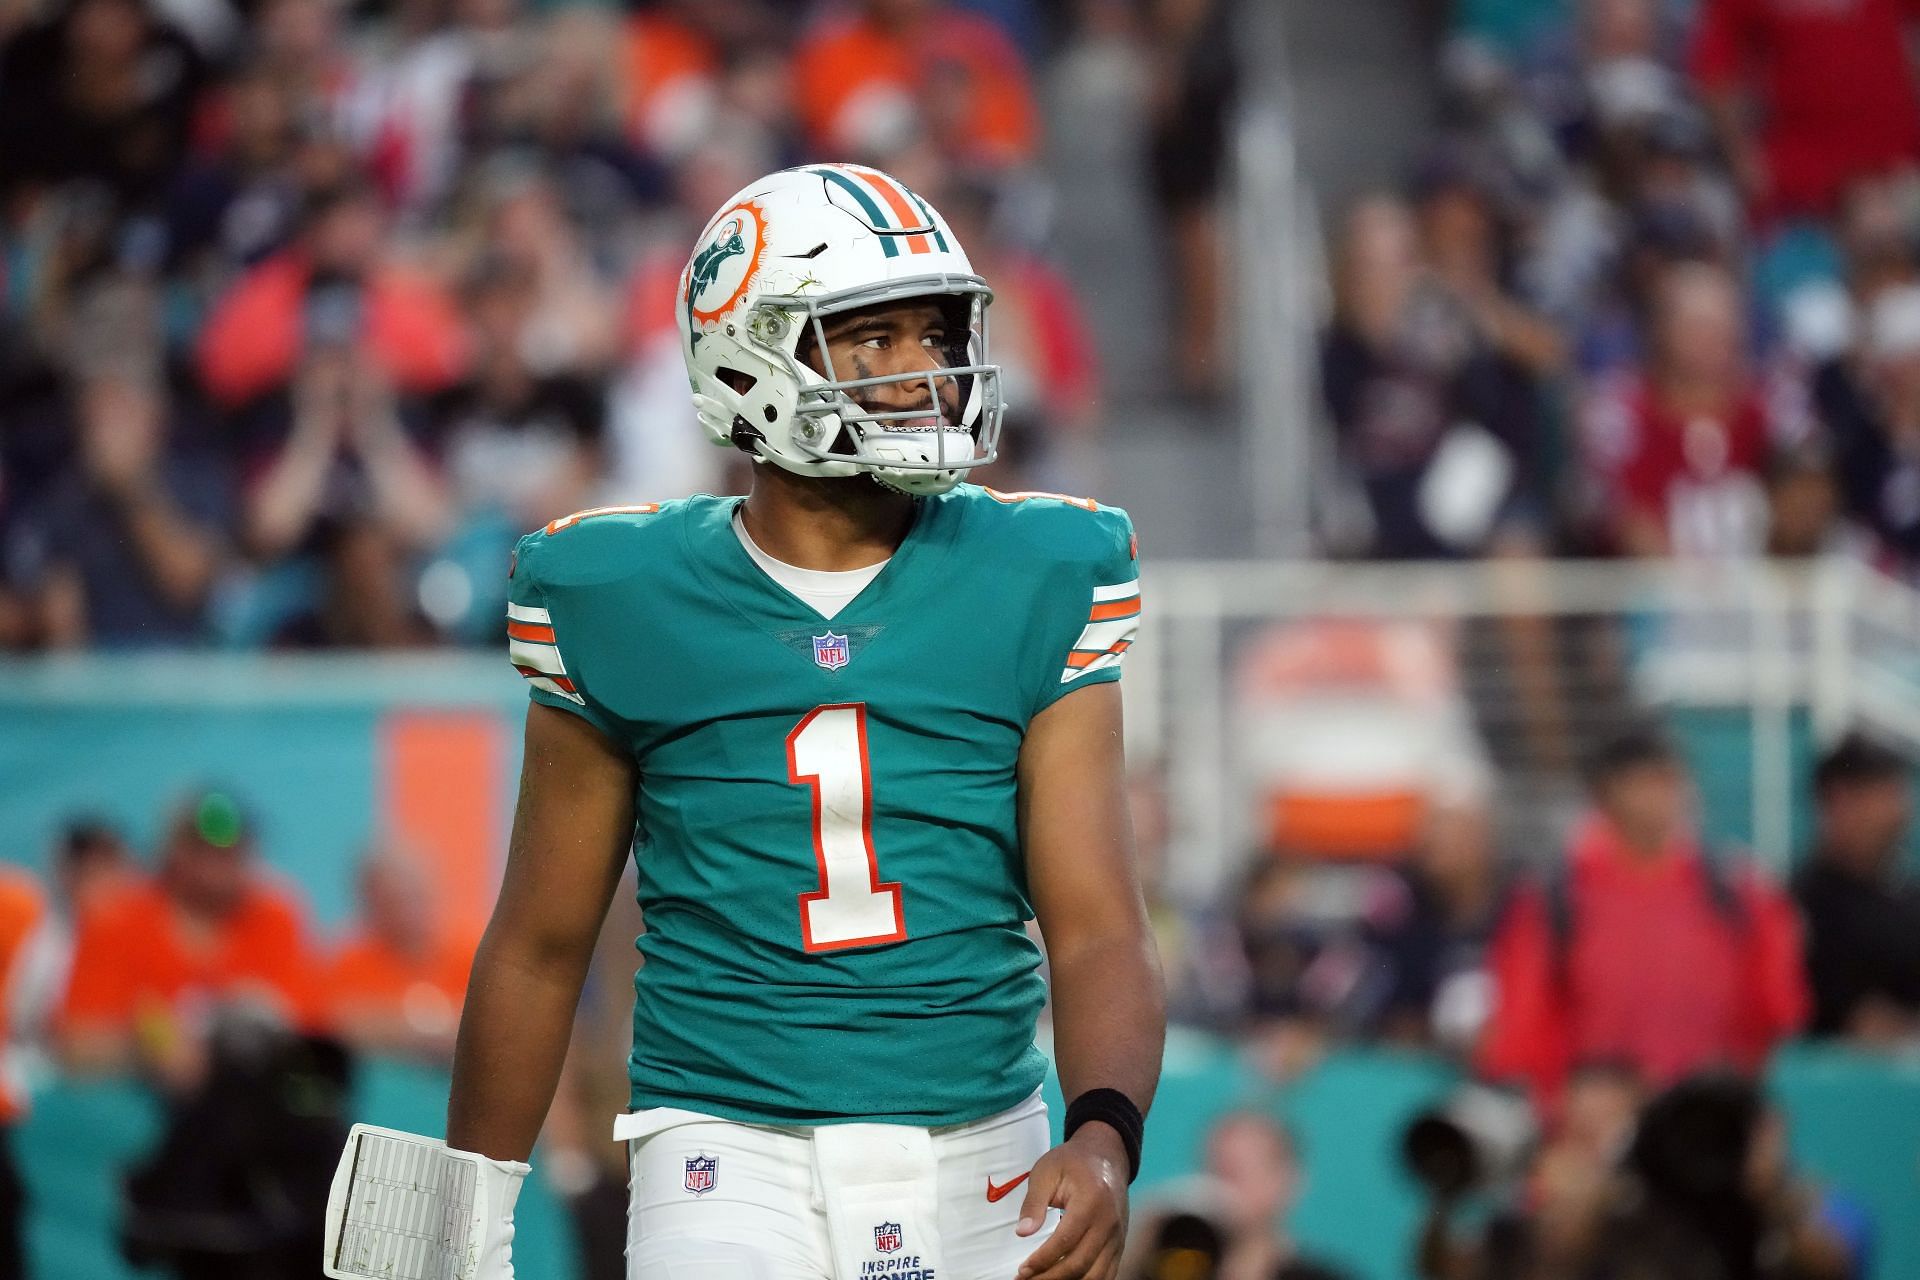 Tua Tagovailoa is yet to justify the faith placed in him by the Miami Dolphins in the 2020 NFL Draft.